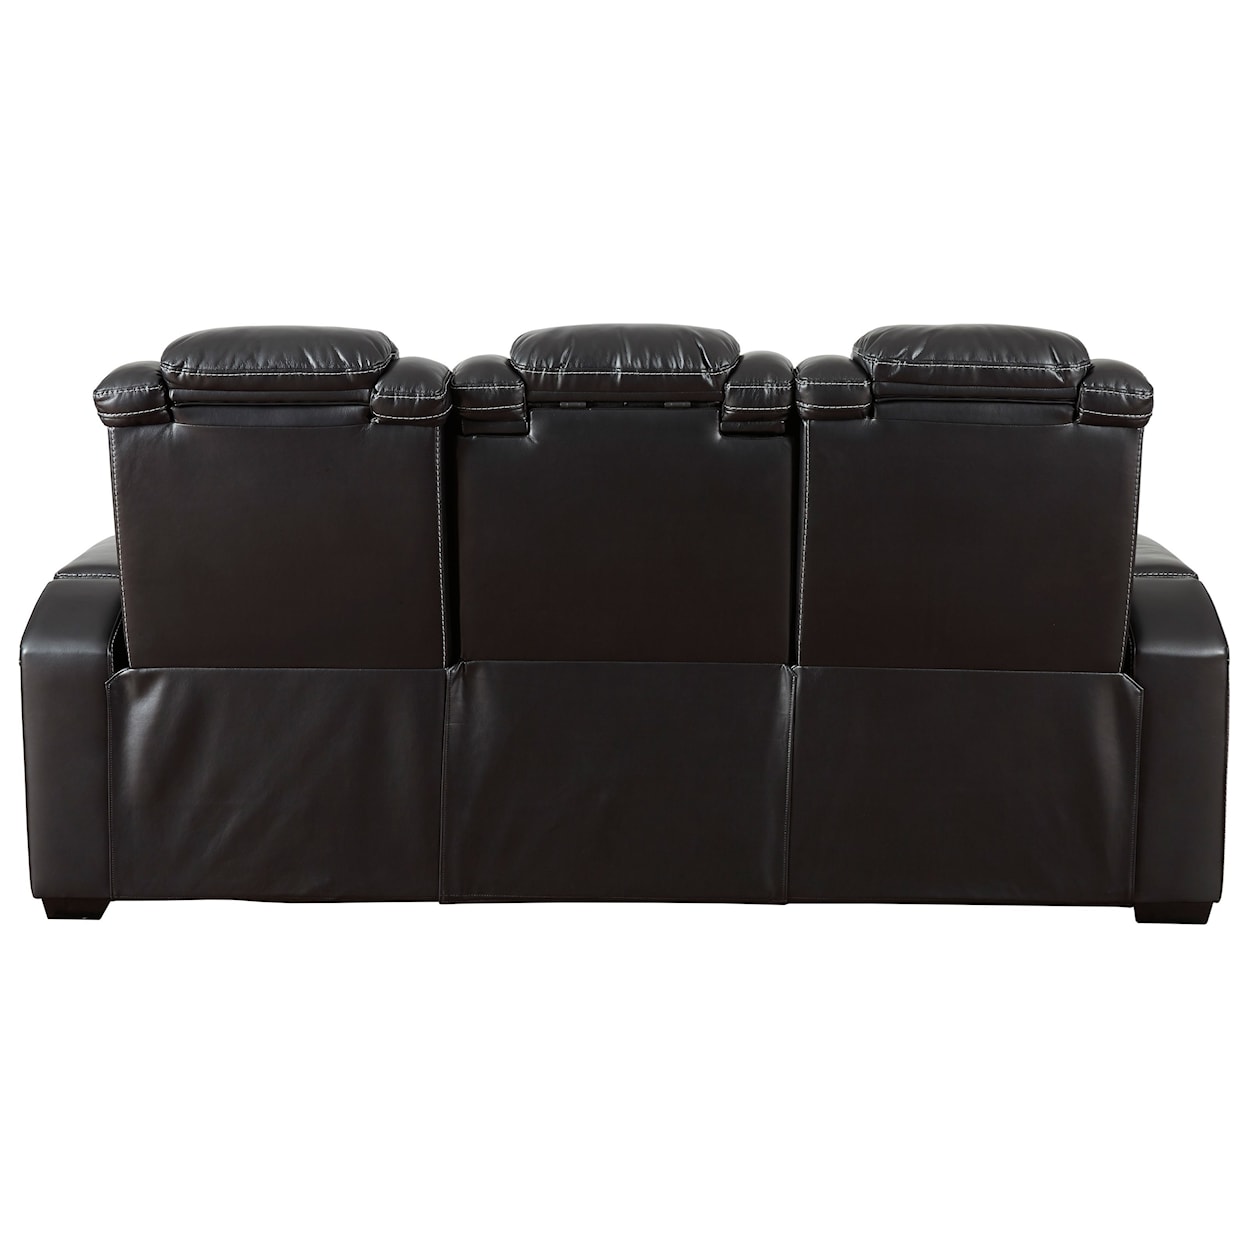 Signature Design by Ashley Party Time Power Reclining Sofa w/ Adjustable Headrests